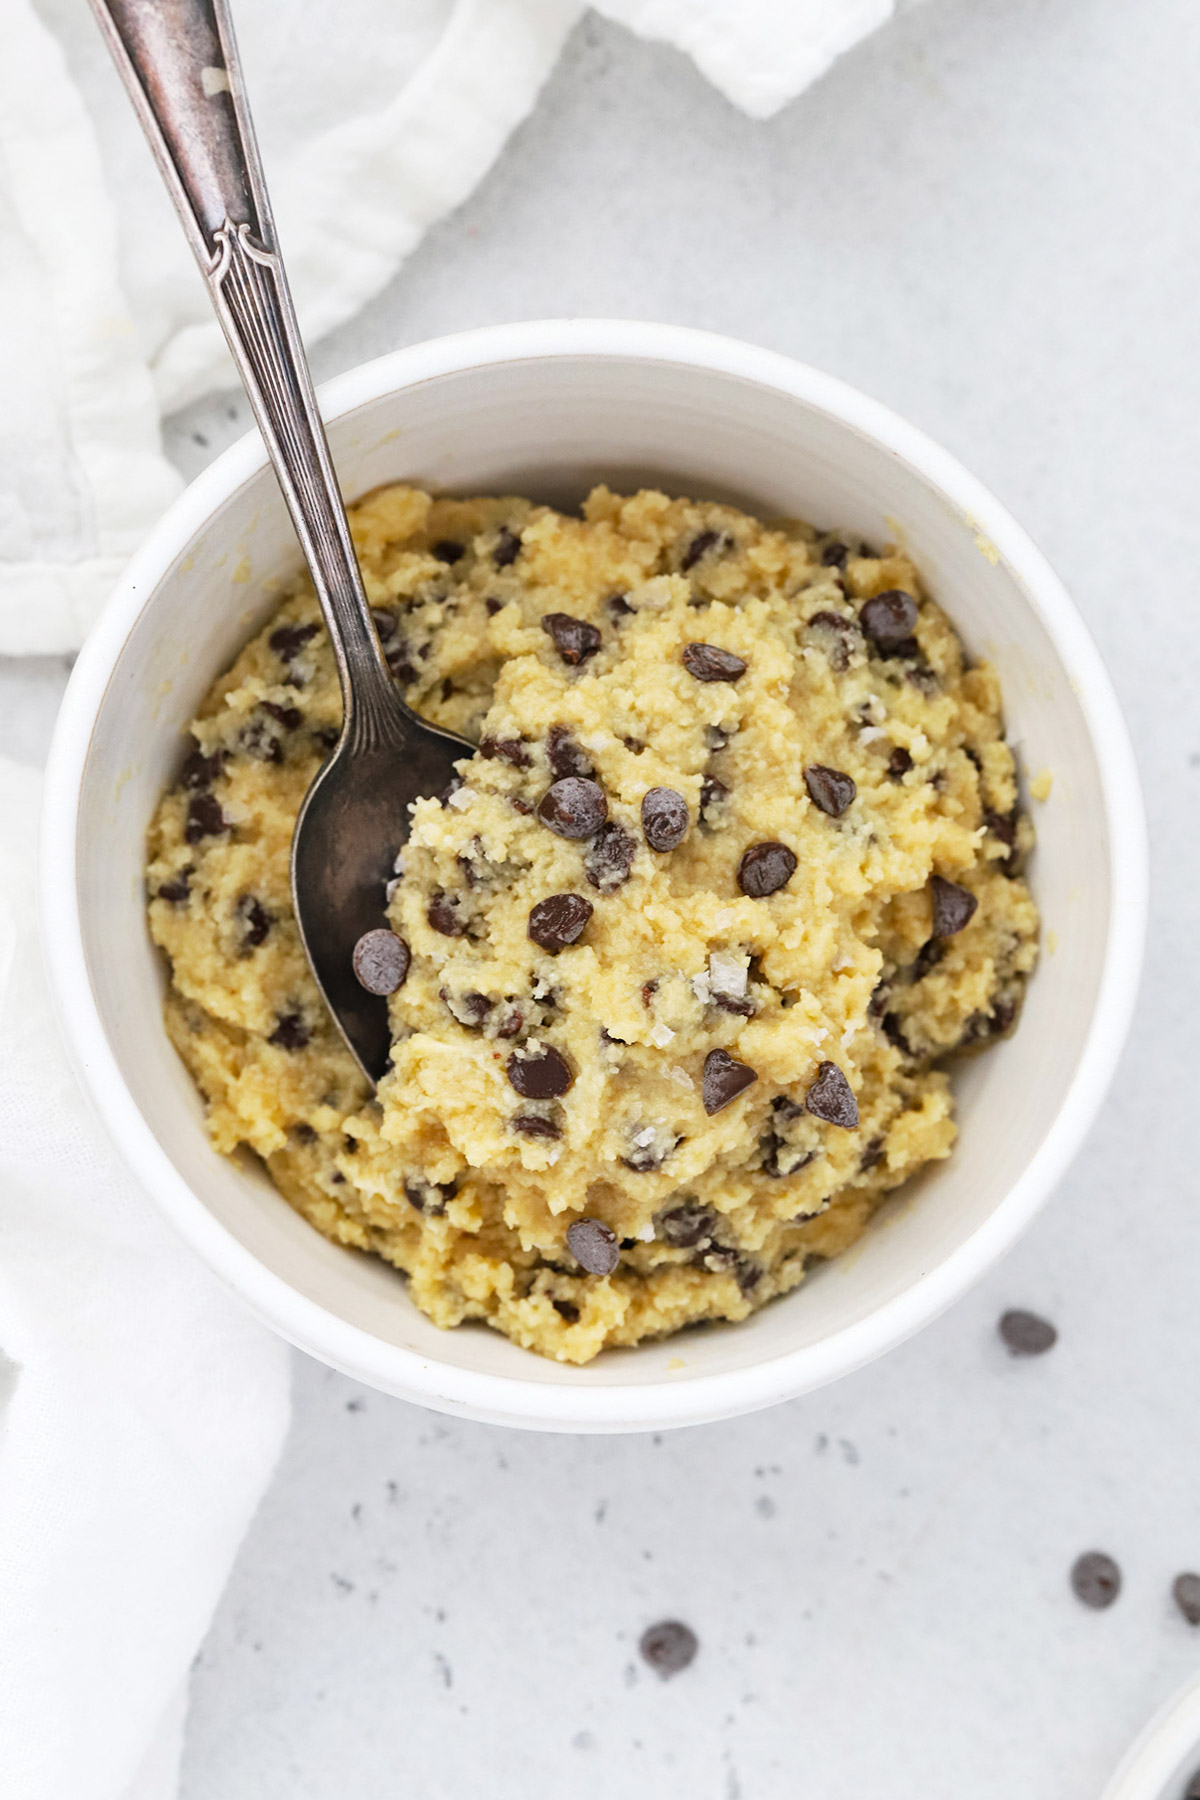 Overhead view of a bowl of healthy edible cookie dough with chocolate chips